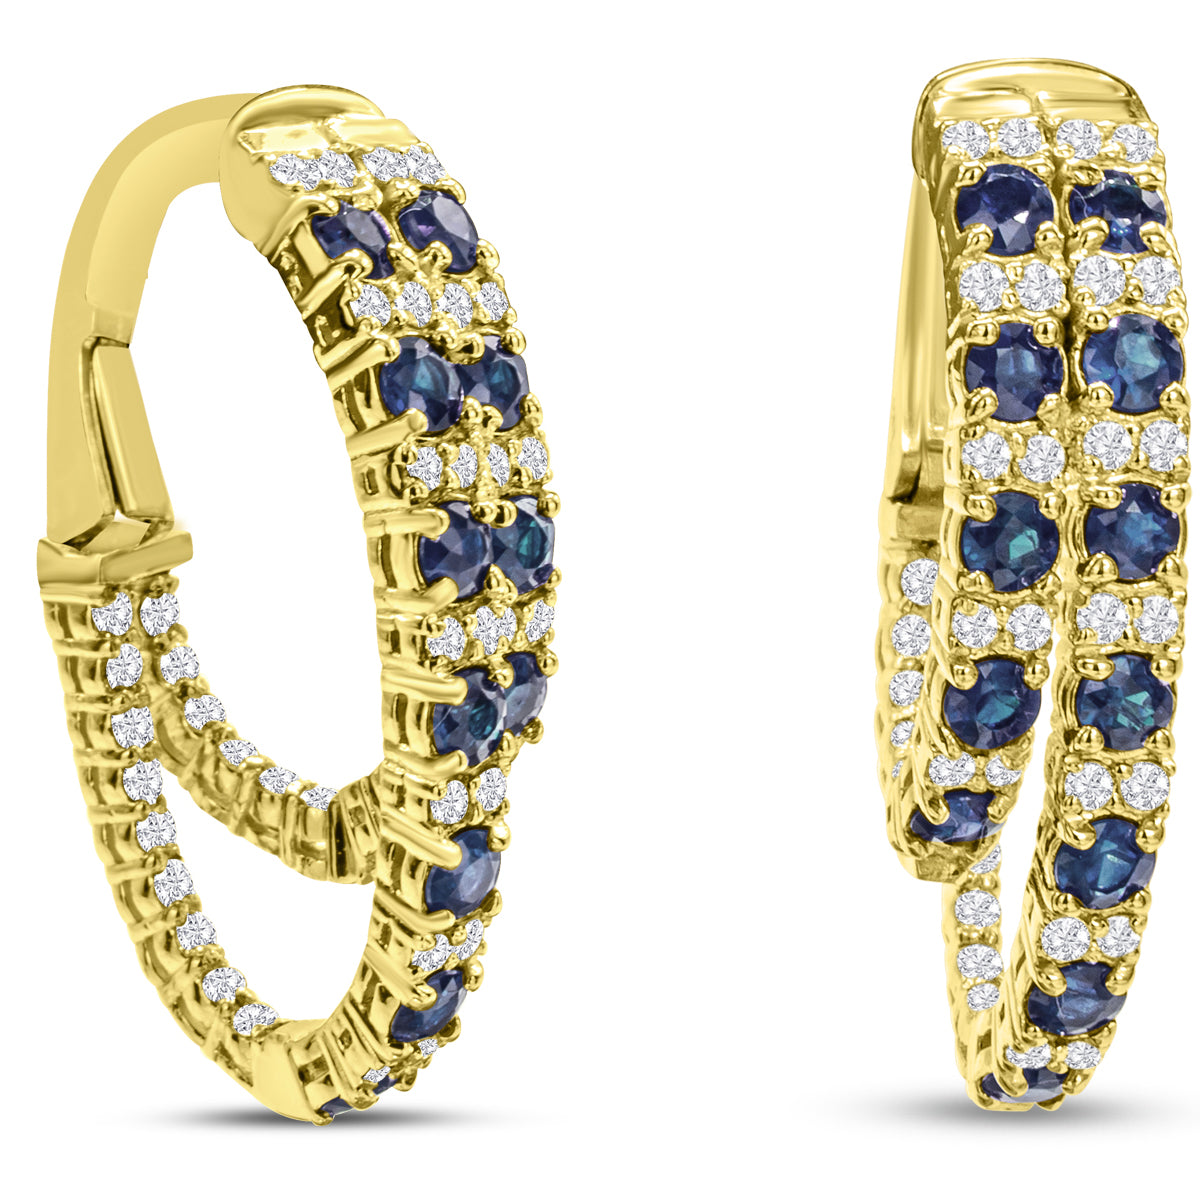 Sselects 2 1/2 Carat Sapphire And Diamond Hoop Earrings In 14 Karat Yellow I-j, I1-i2 In Gold